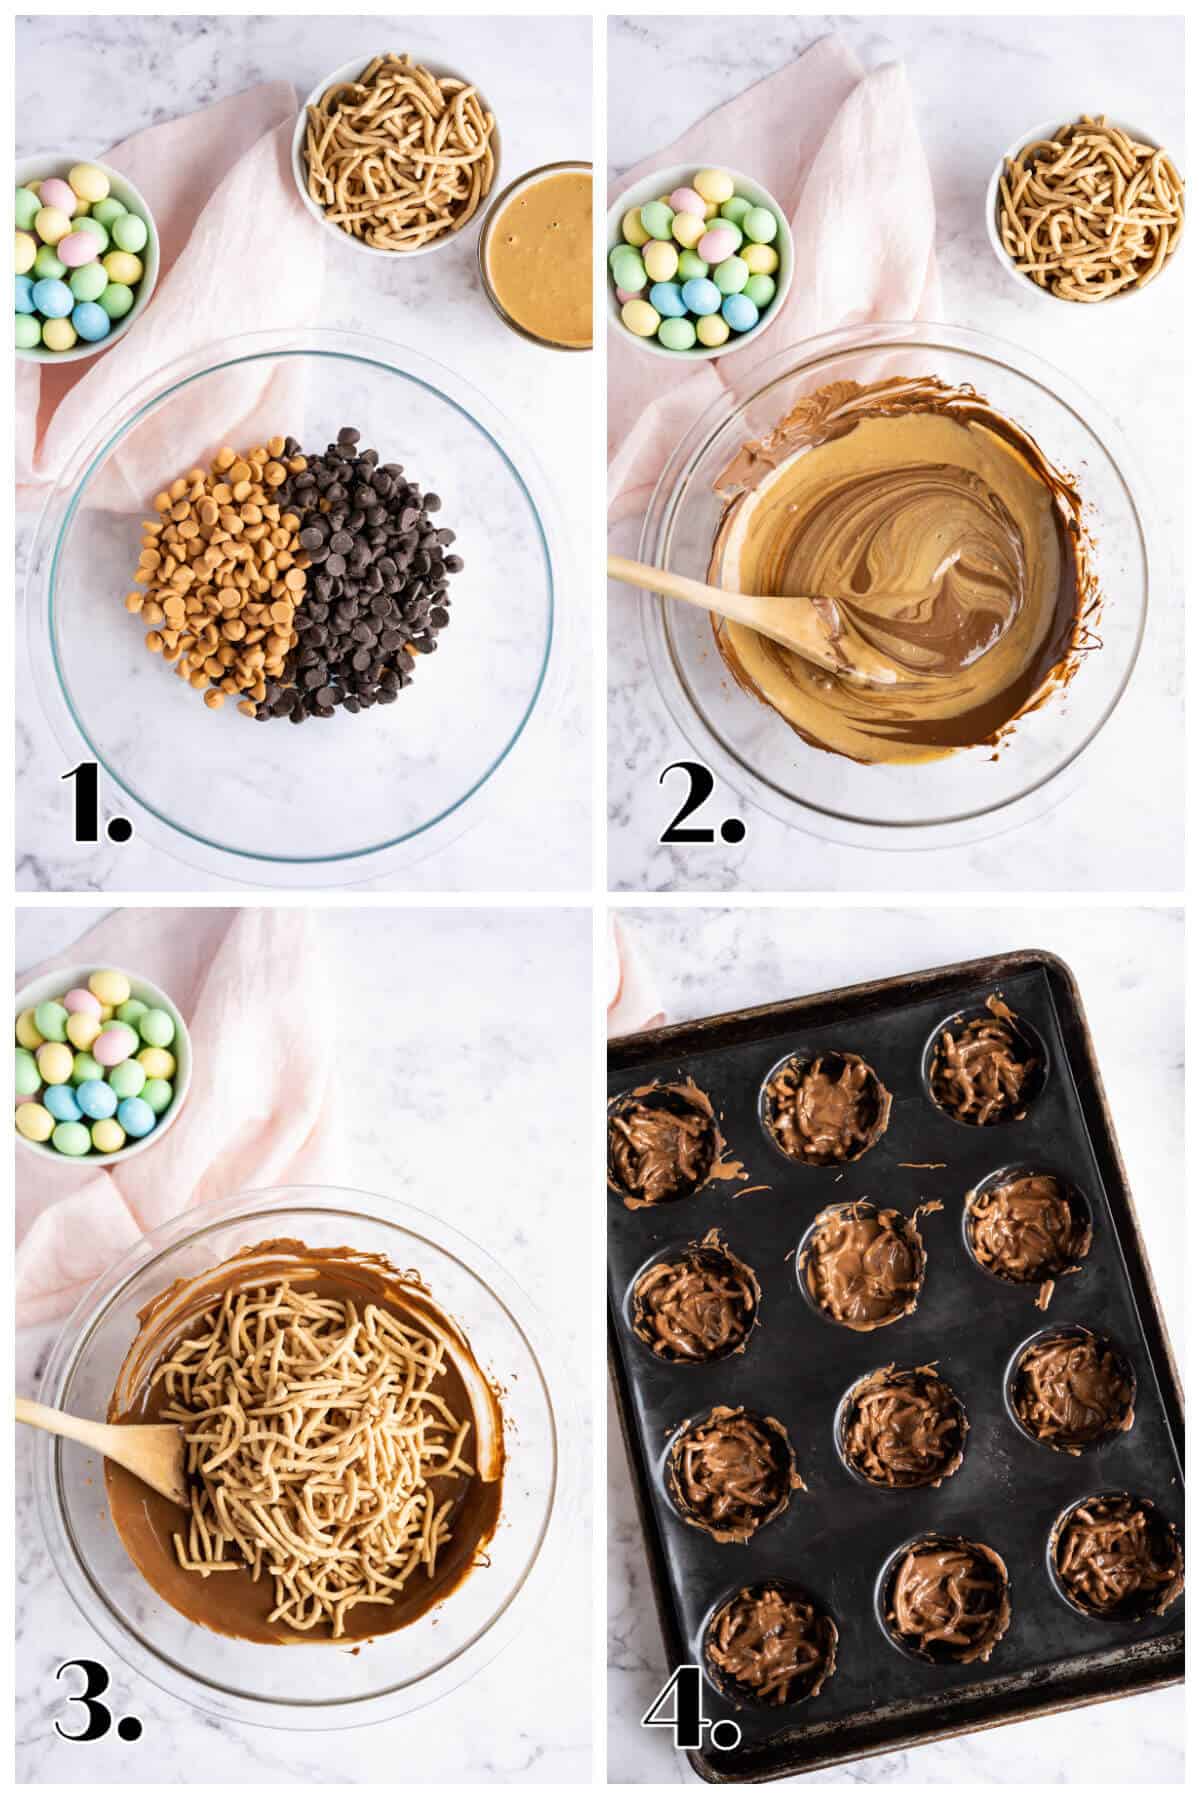 4 image collage showing steps to make Bird Nest Cookies. Melt chips, stir in peanut butter, stir in chow mein noodles, scoop into muffin pan.